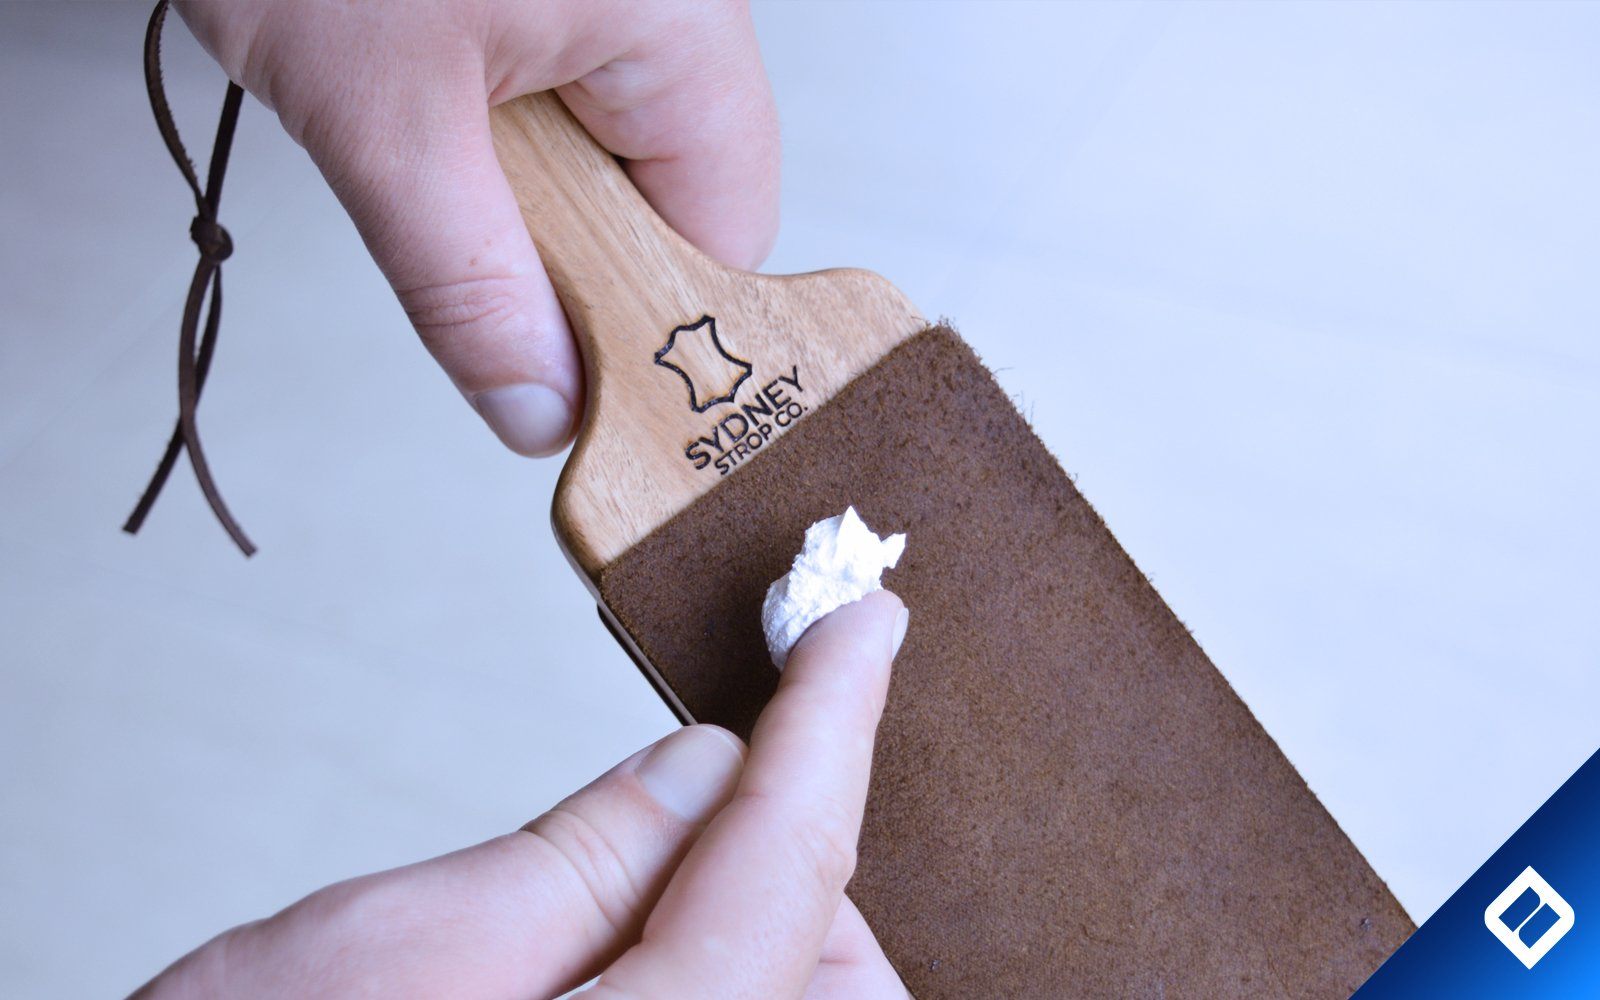 How to use strop paste